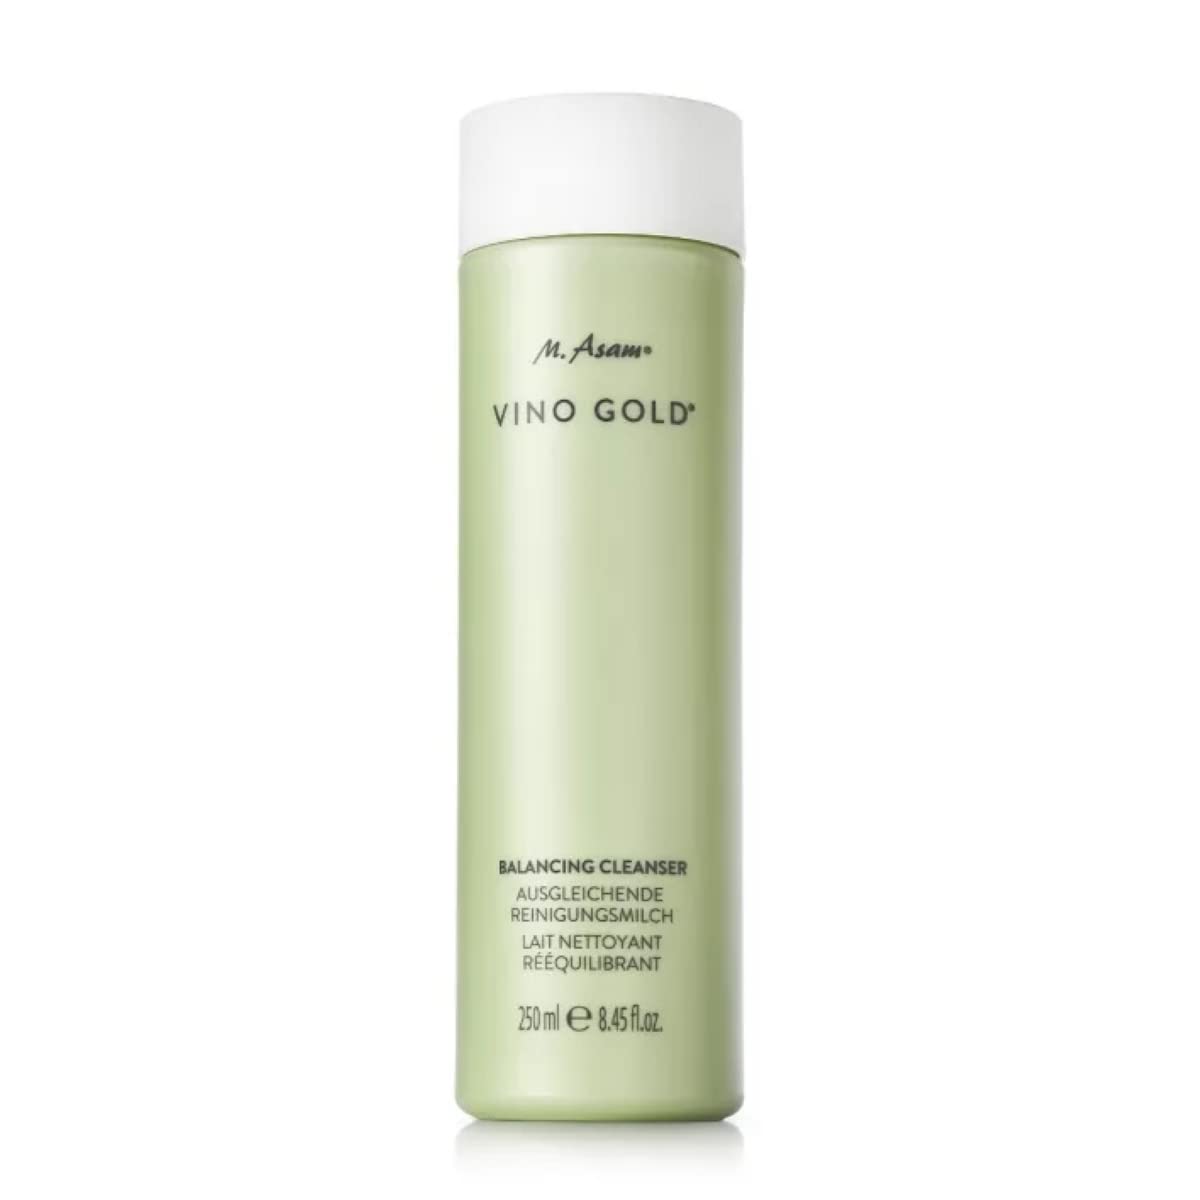 M. Asam VINO GOLD Balancing Cleansing Milk (250ml) - Cleans & Frees Skin of Impurities, Ideal for Removing Makeup, Moisturises, with Vitamin E, Vegan Facial Cleansing